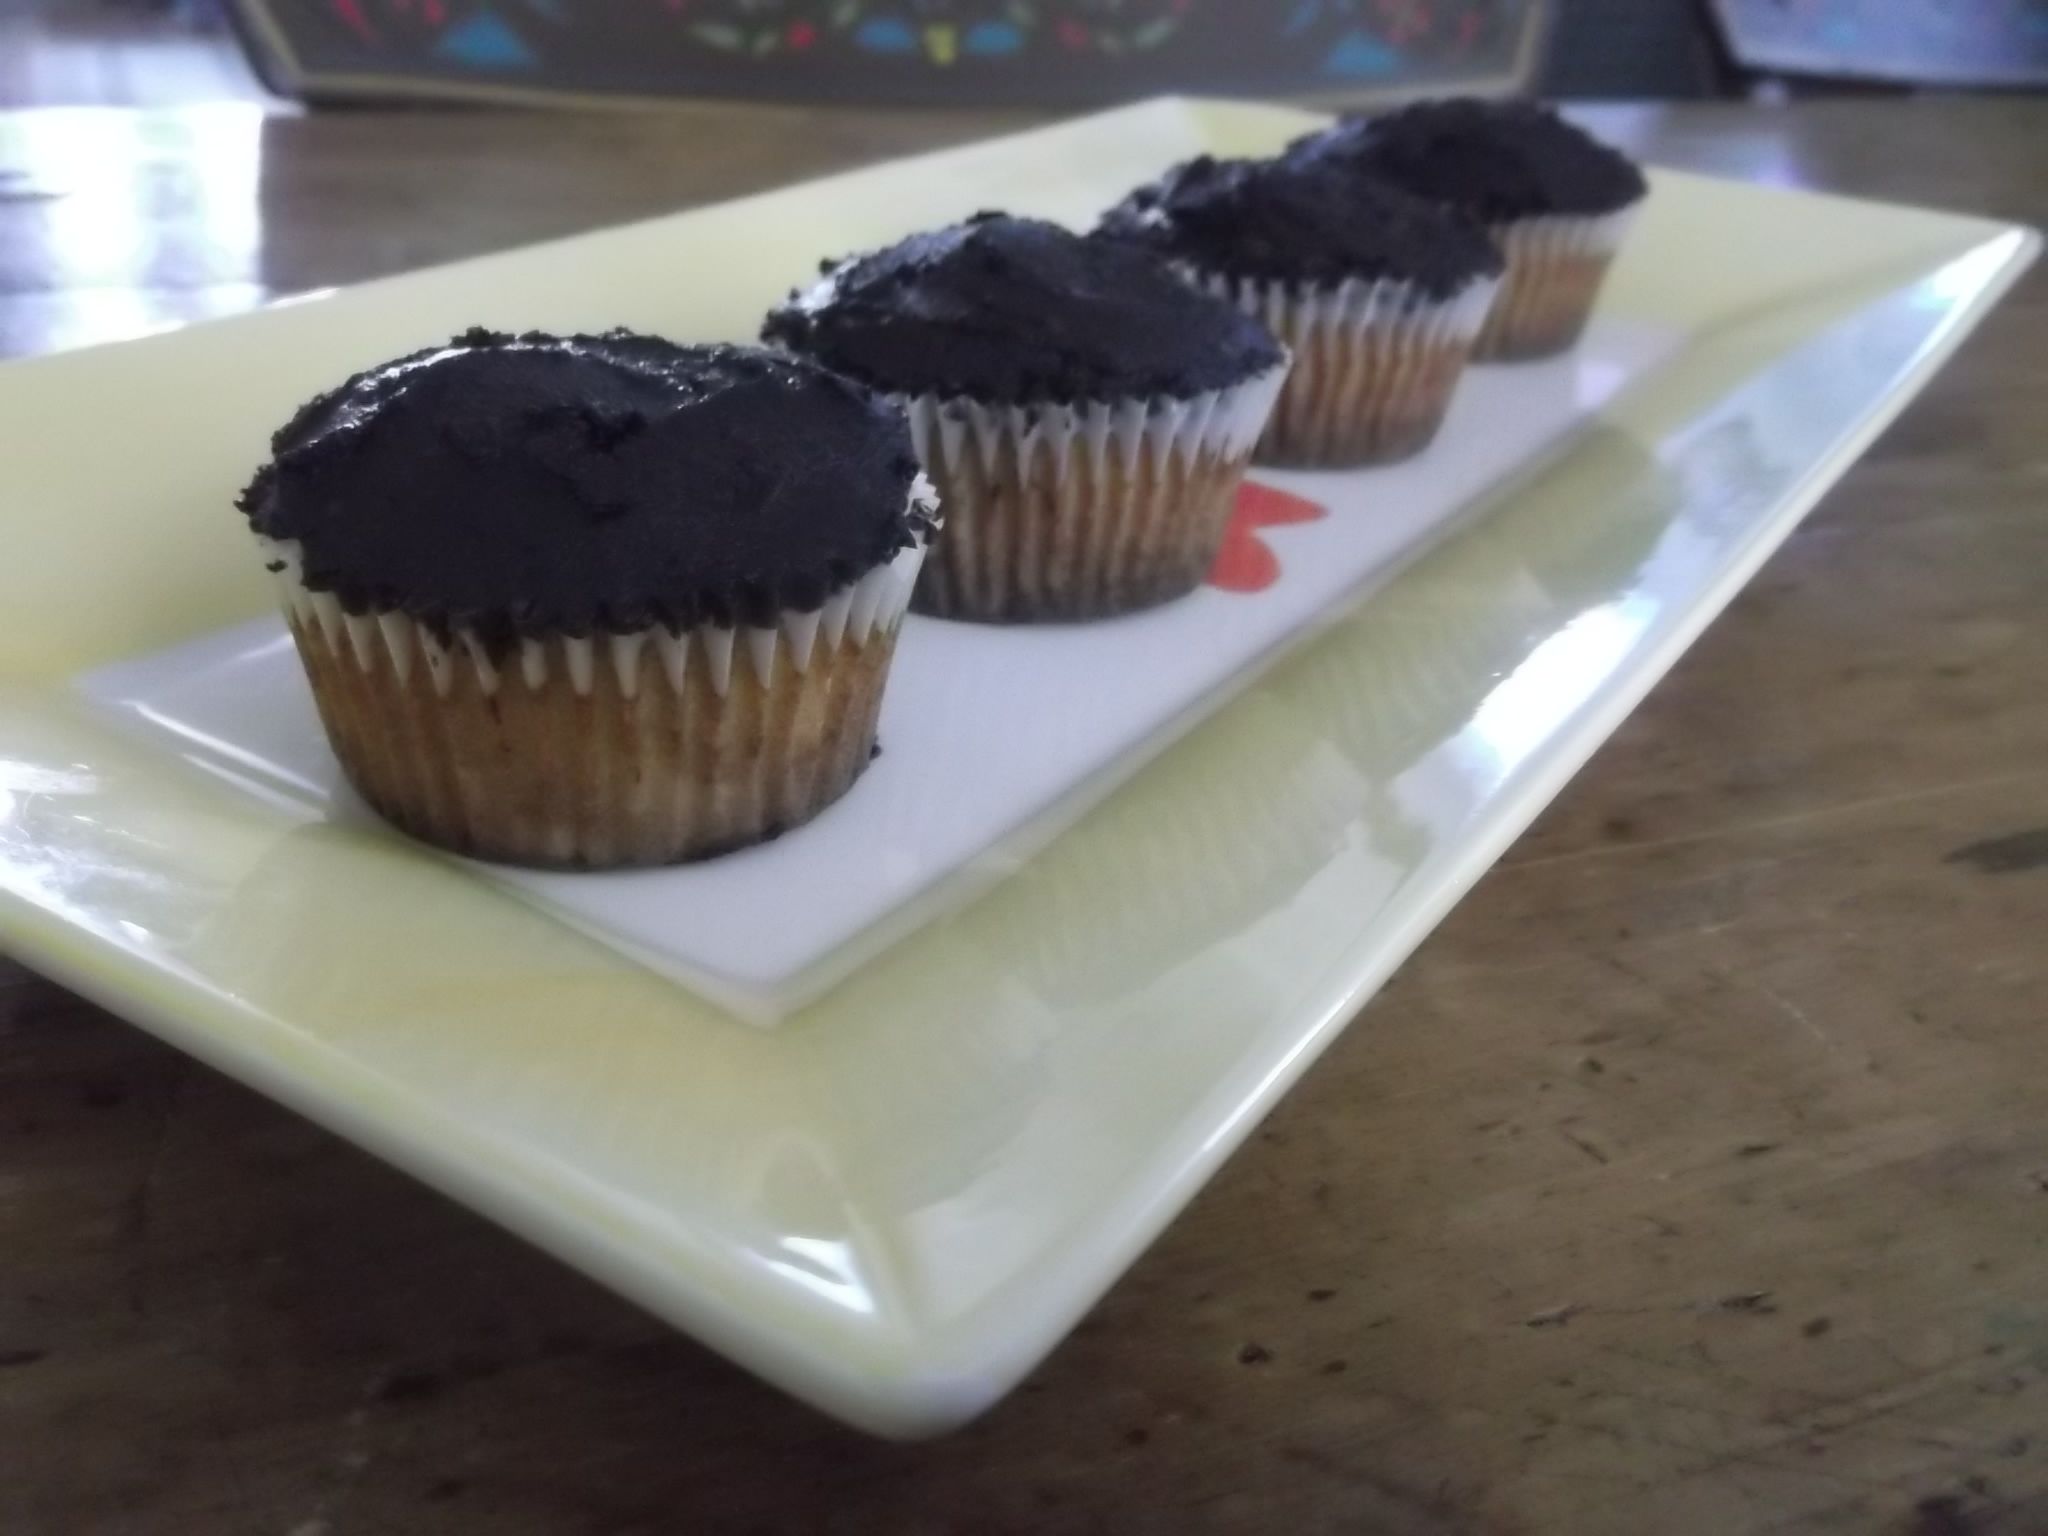 Paleo Cupcakes with Chocolate Frosting